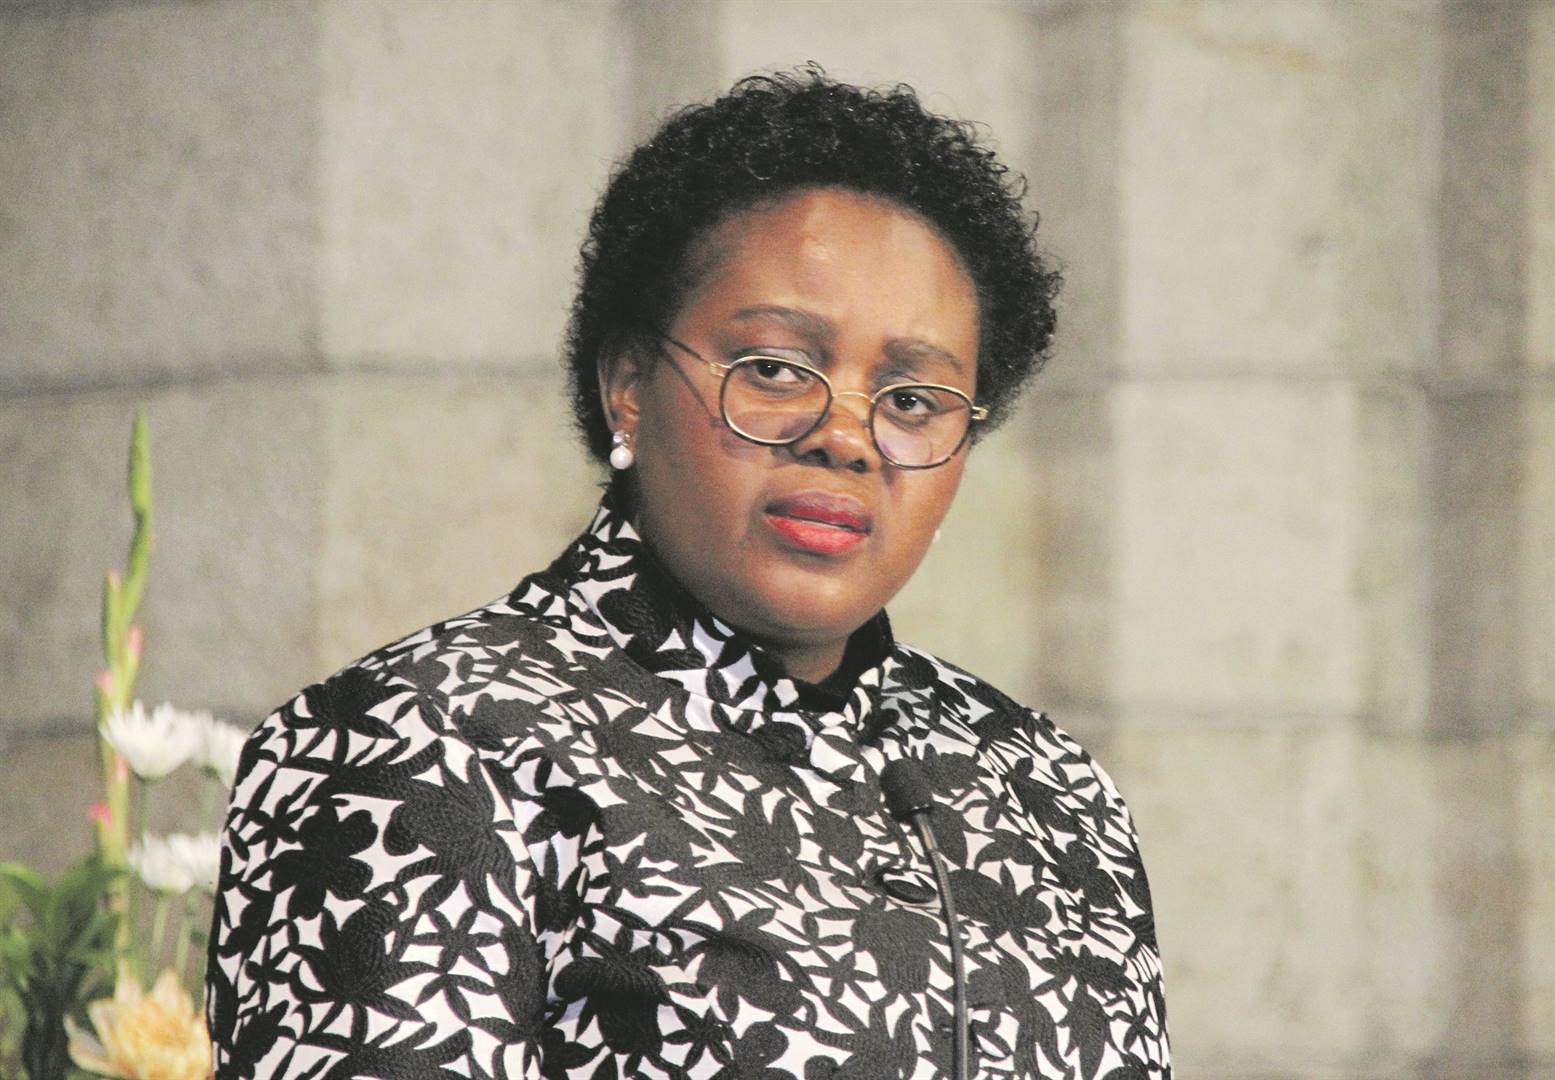 Human Settlements Minister Mmamoloko Kubayi says she made the decision to ensure stability in the department. Photo: File